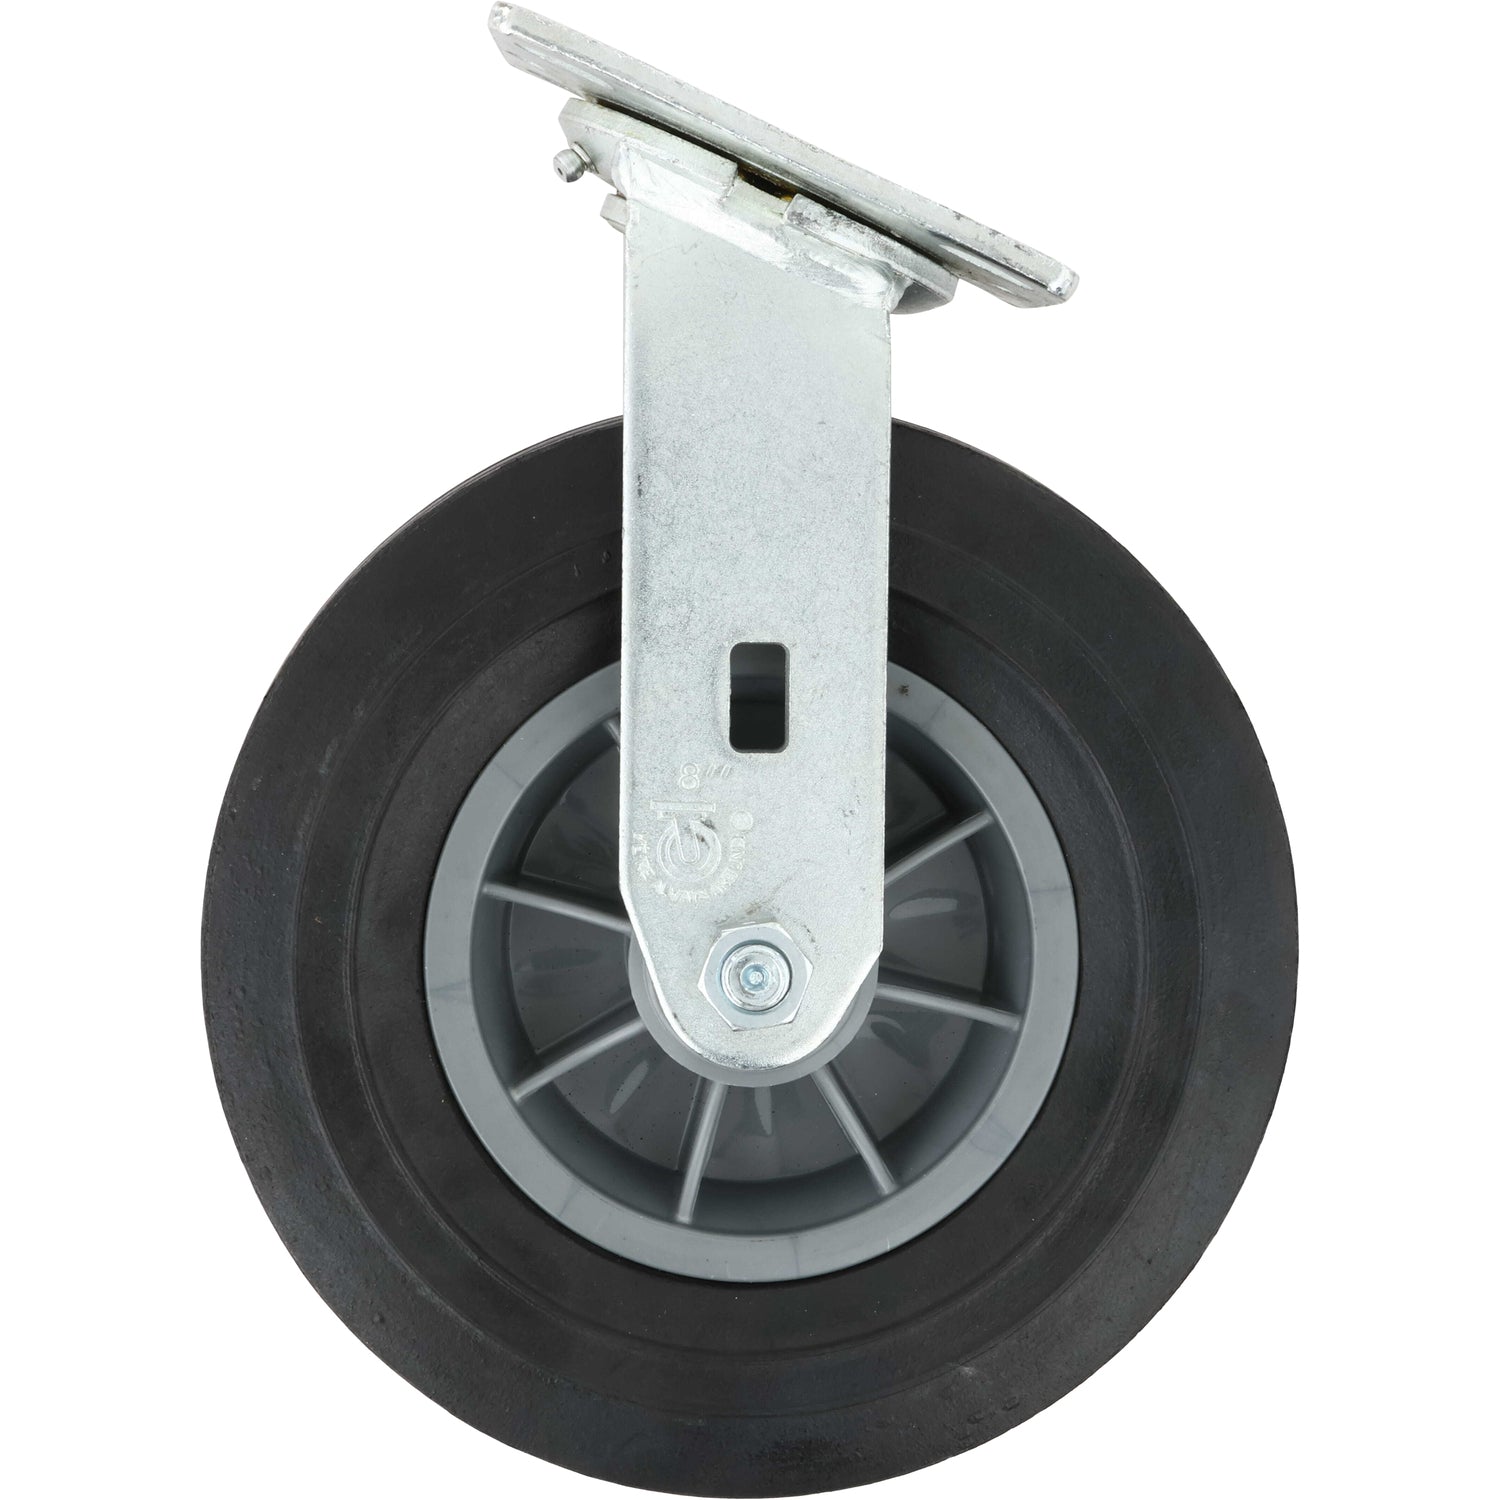 Swivel Caster with black rubber wheel material on white background.